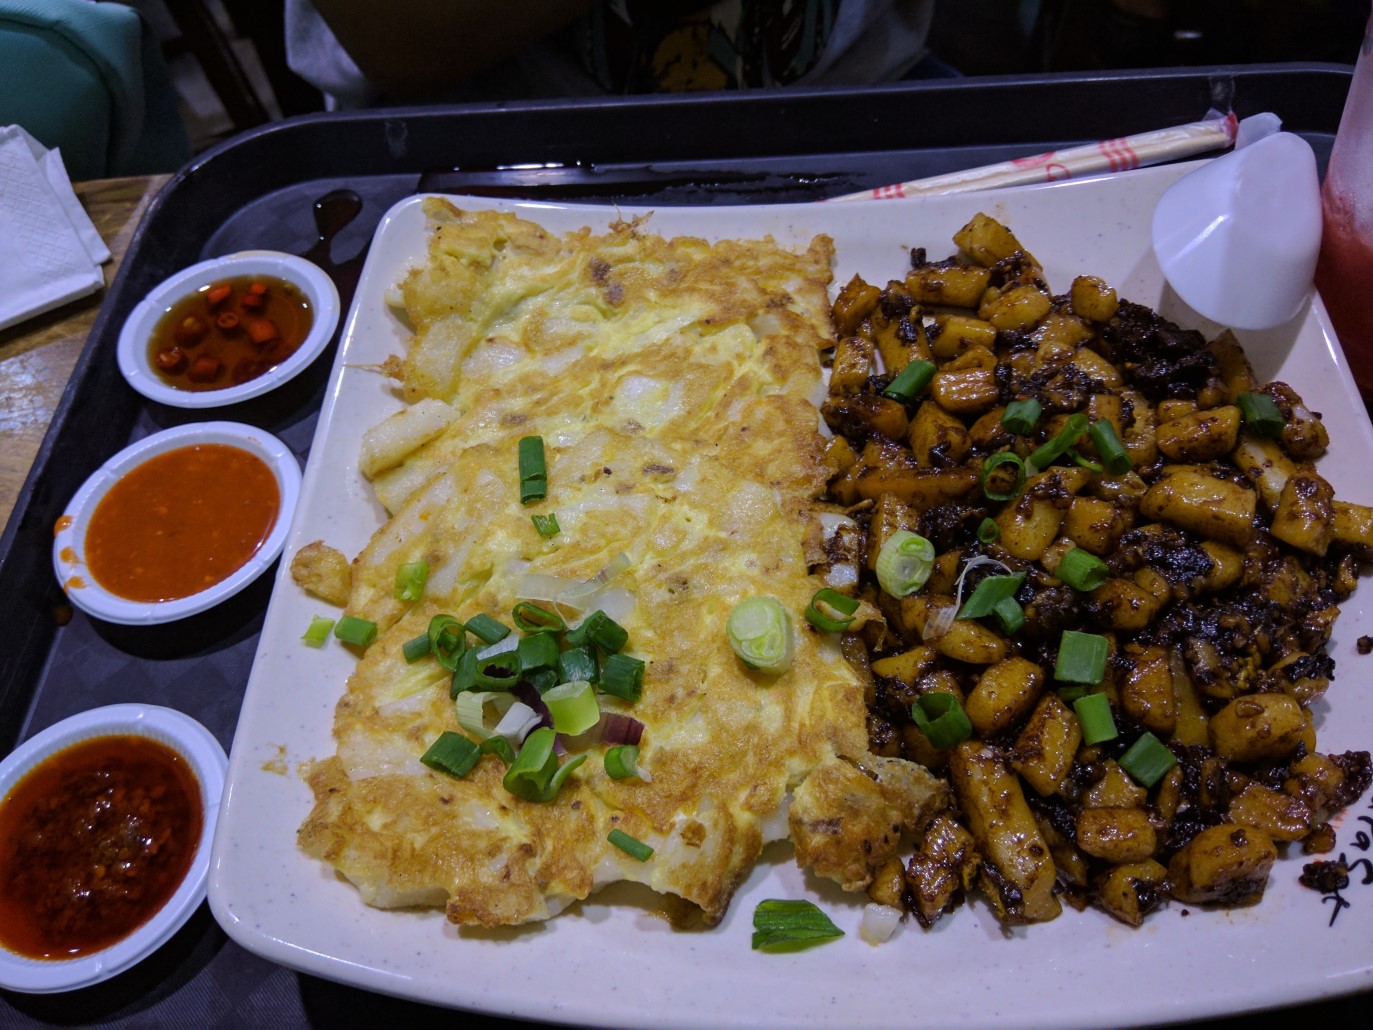 Fried carrot cake- a typical Singaporean dish